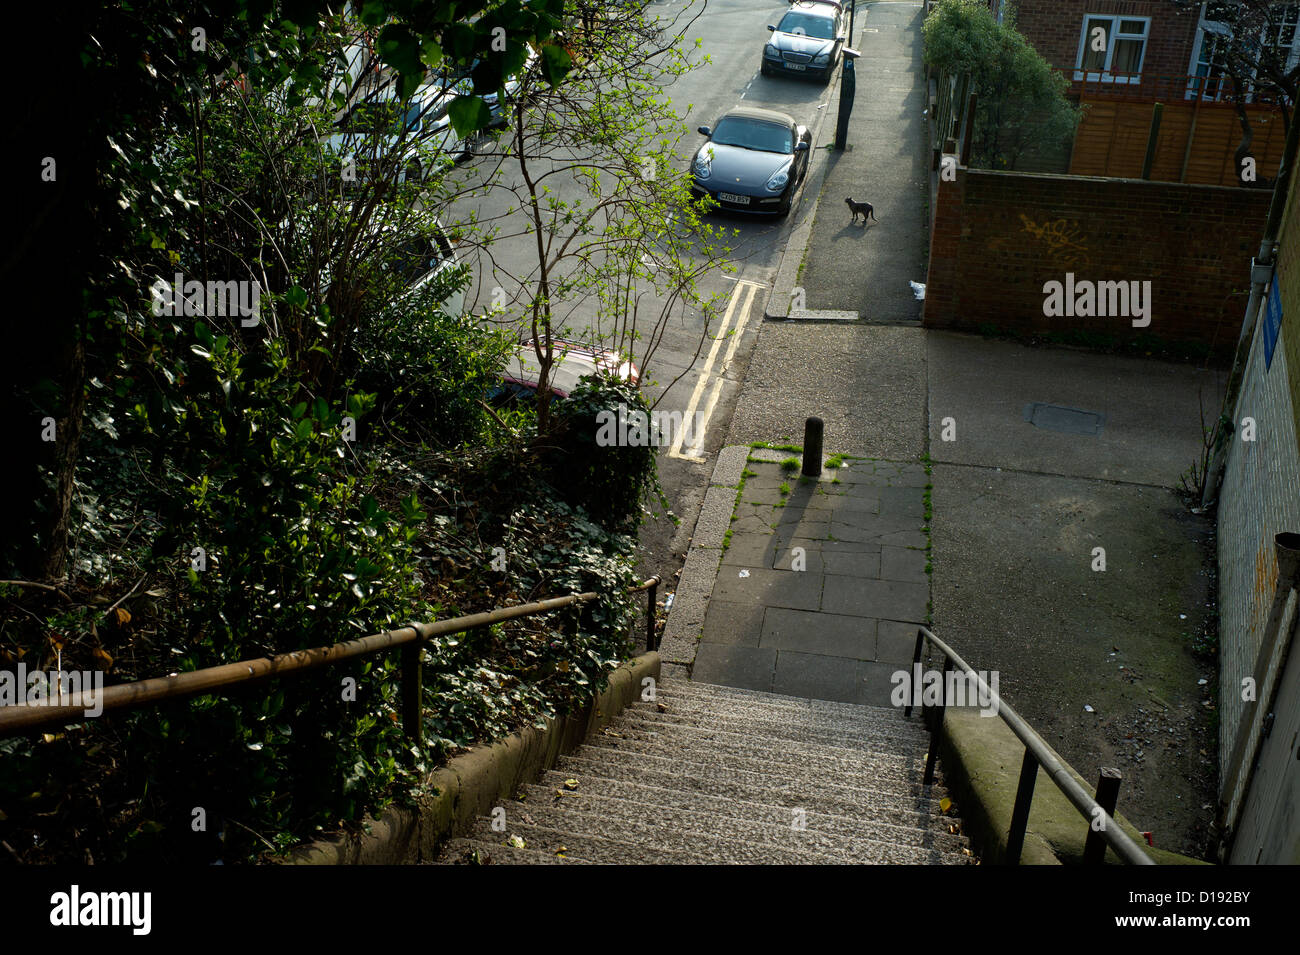 Steps and railings leading down to street. Distant cat, cars. Long shadows Stock Photo